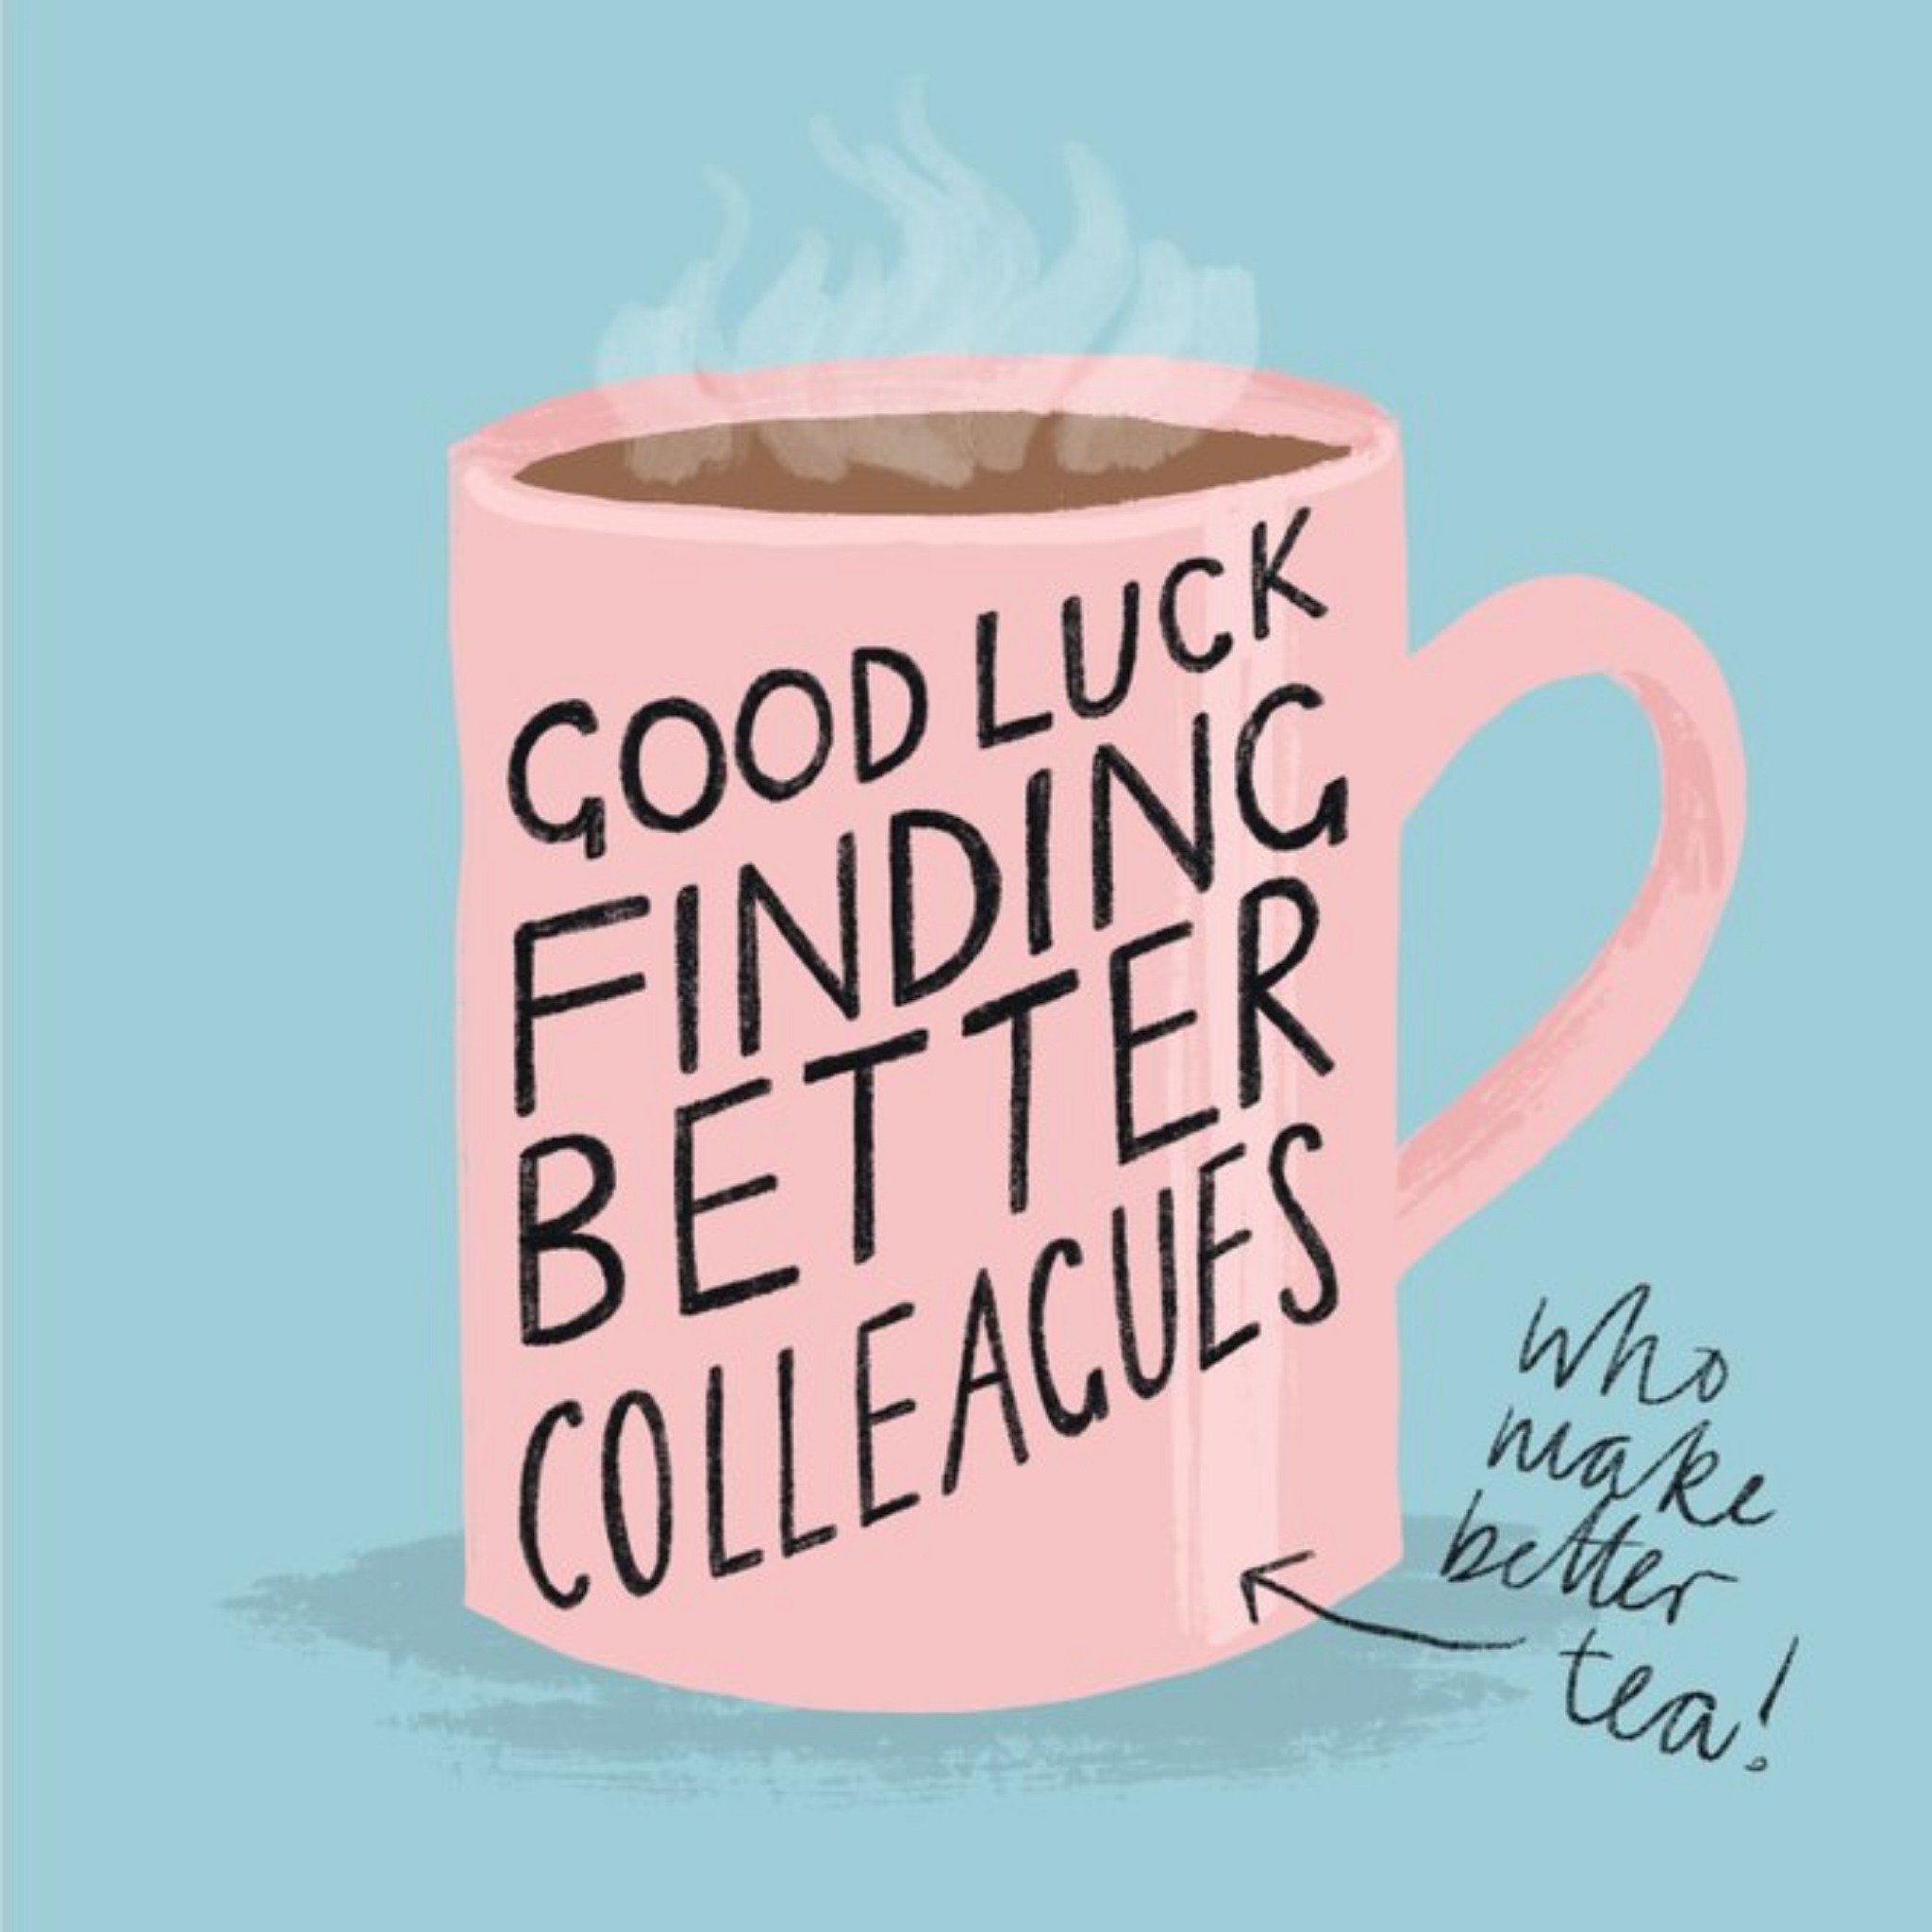 Friends Katy Welsh New Job Good Luck Colleagues Tea Cup Arty Card, Square